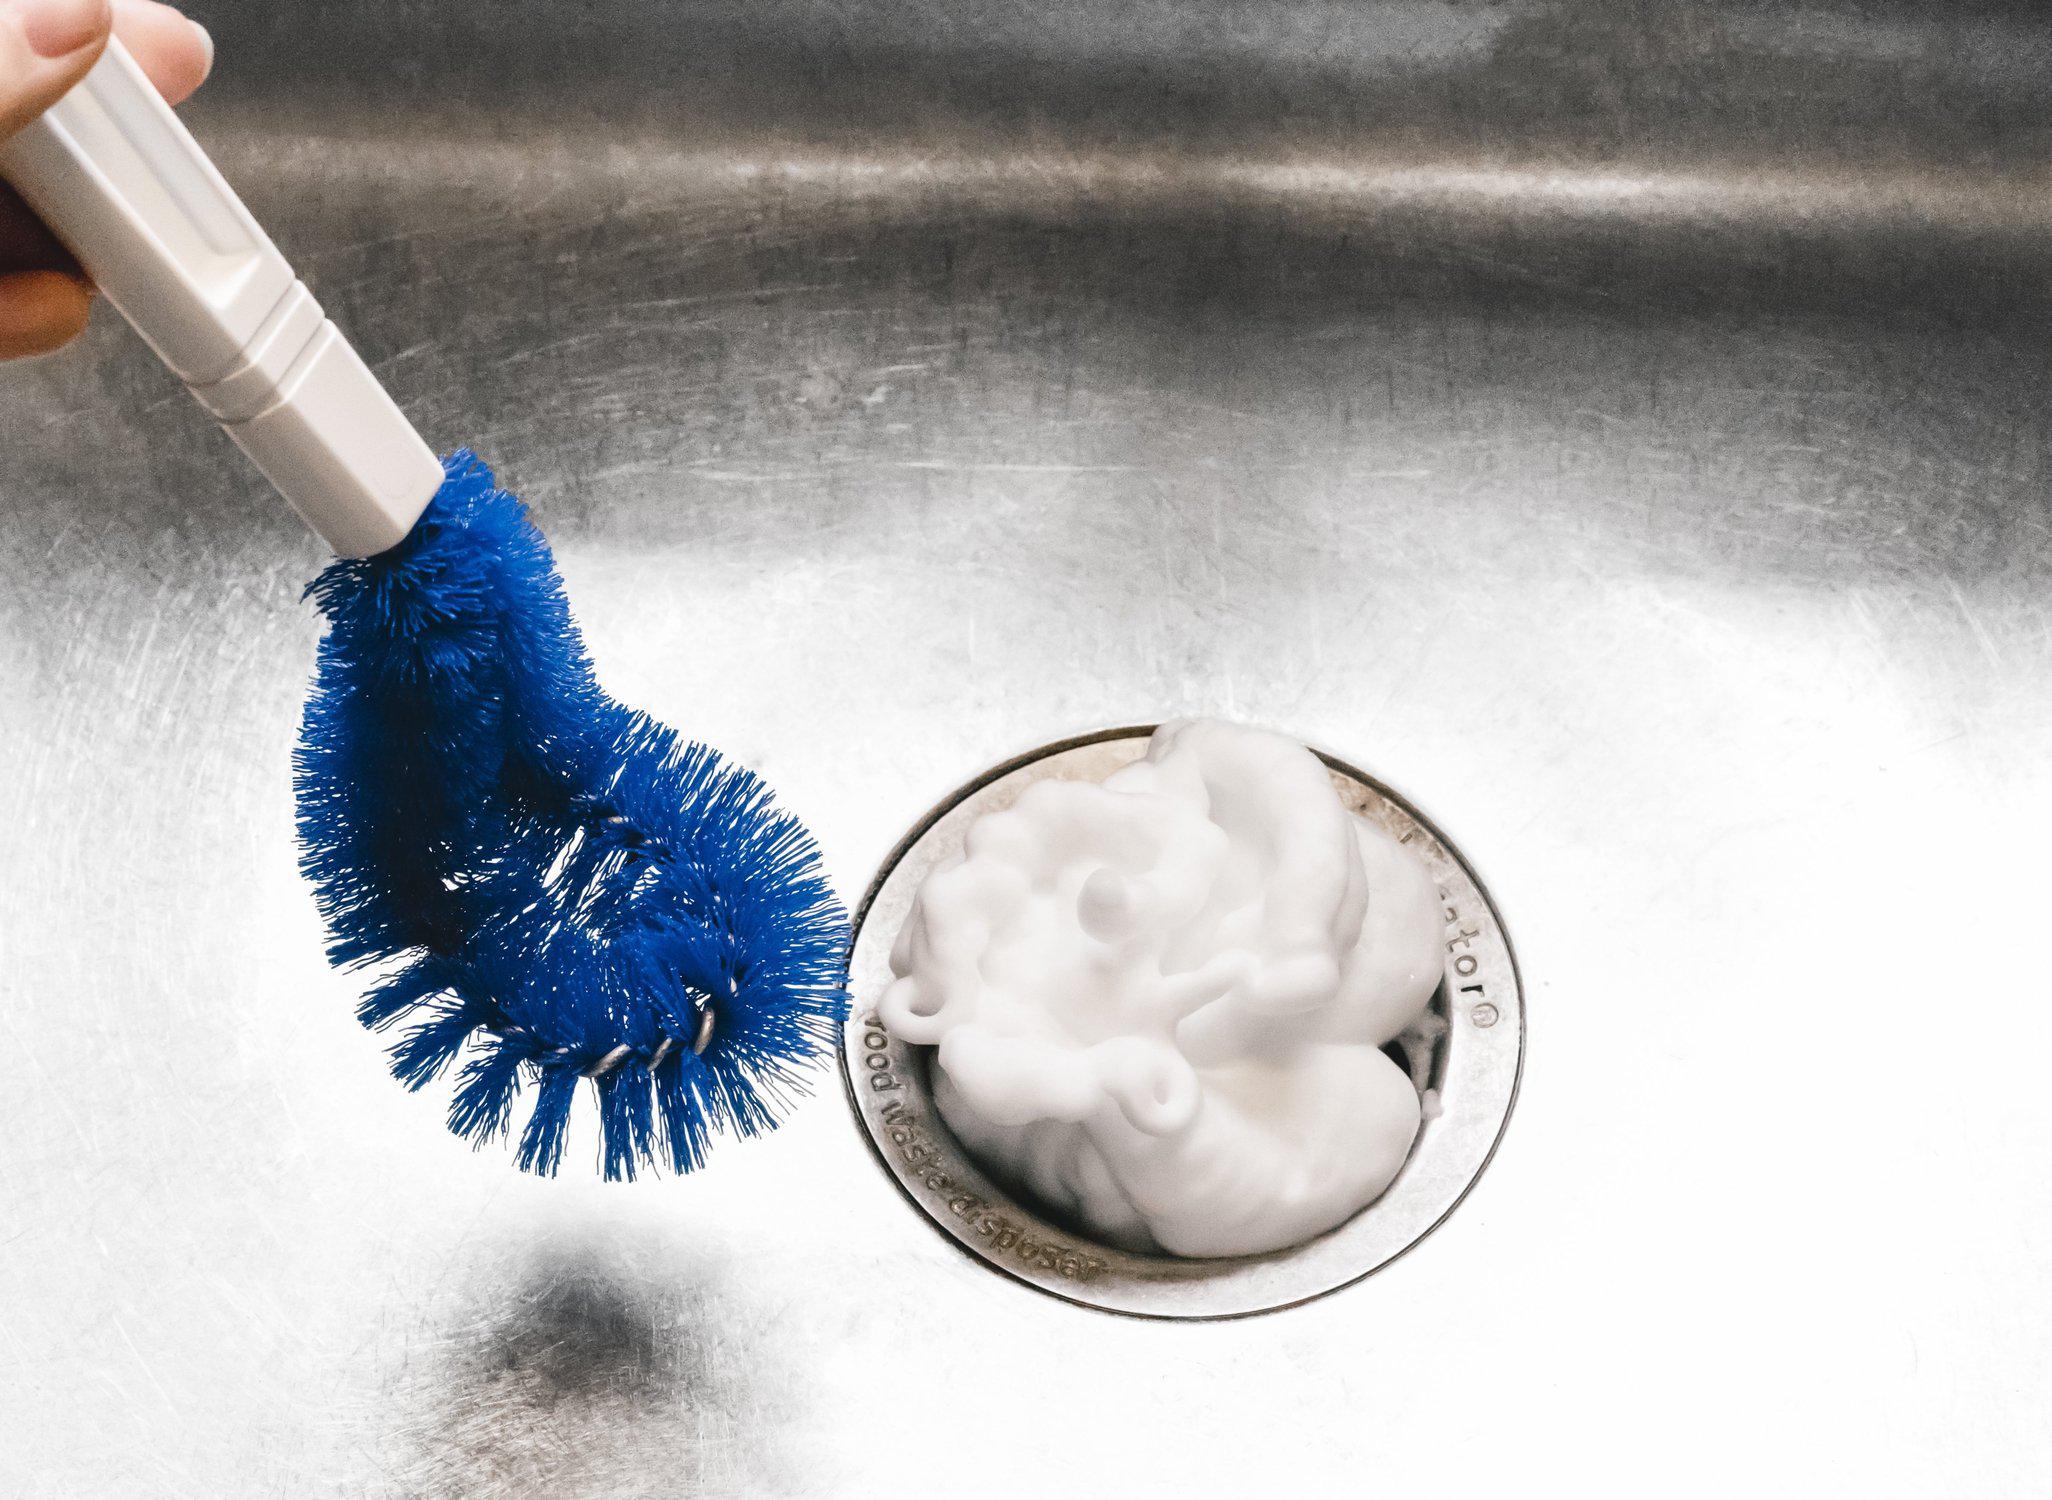 Multi-Functional Long-Handle Liquid-Filled Cleaning Brush, Kitchen